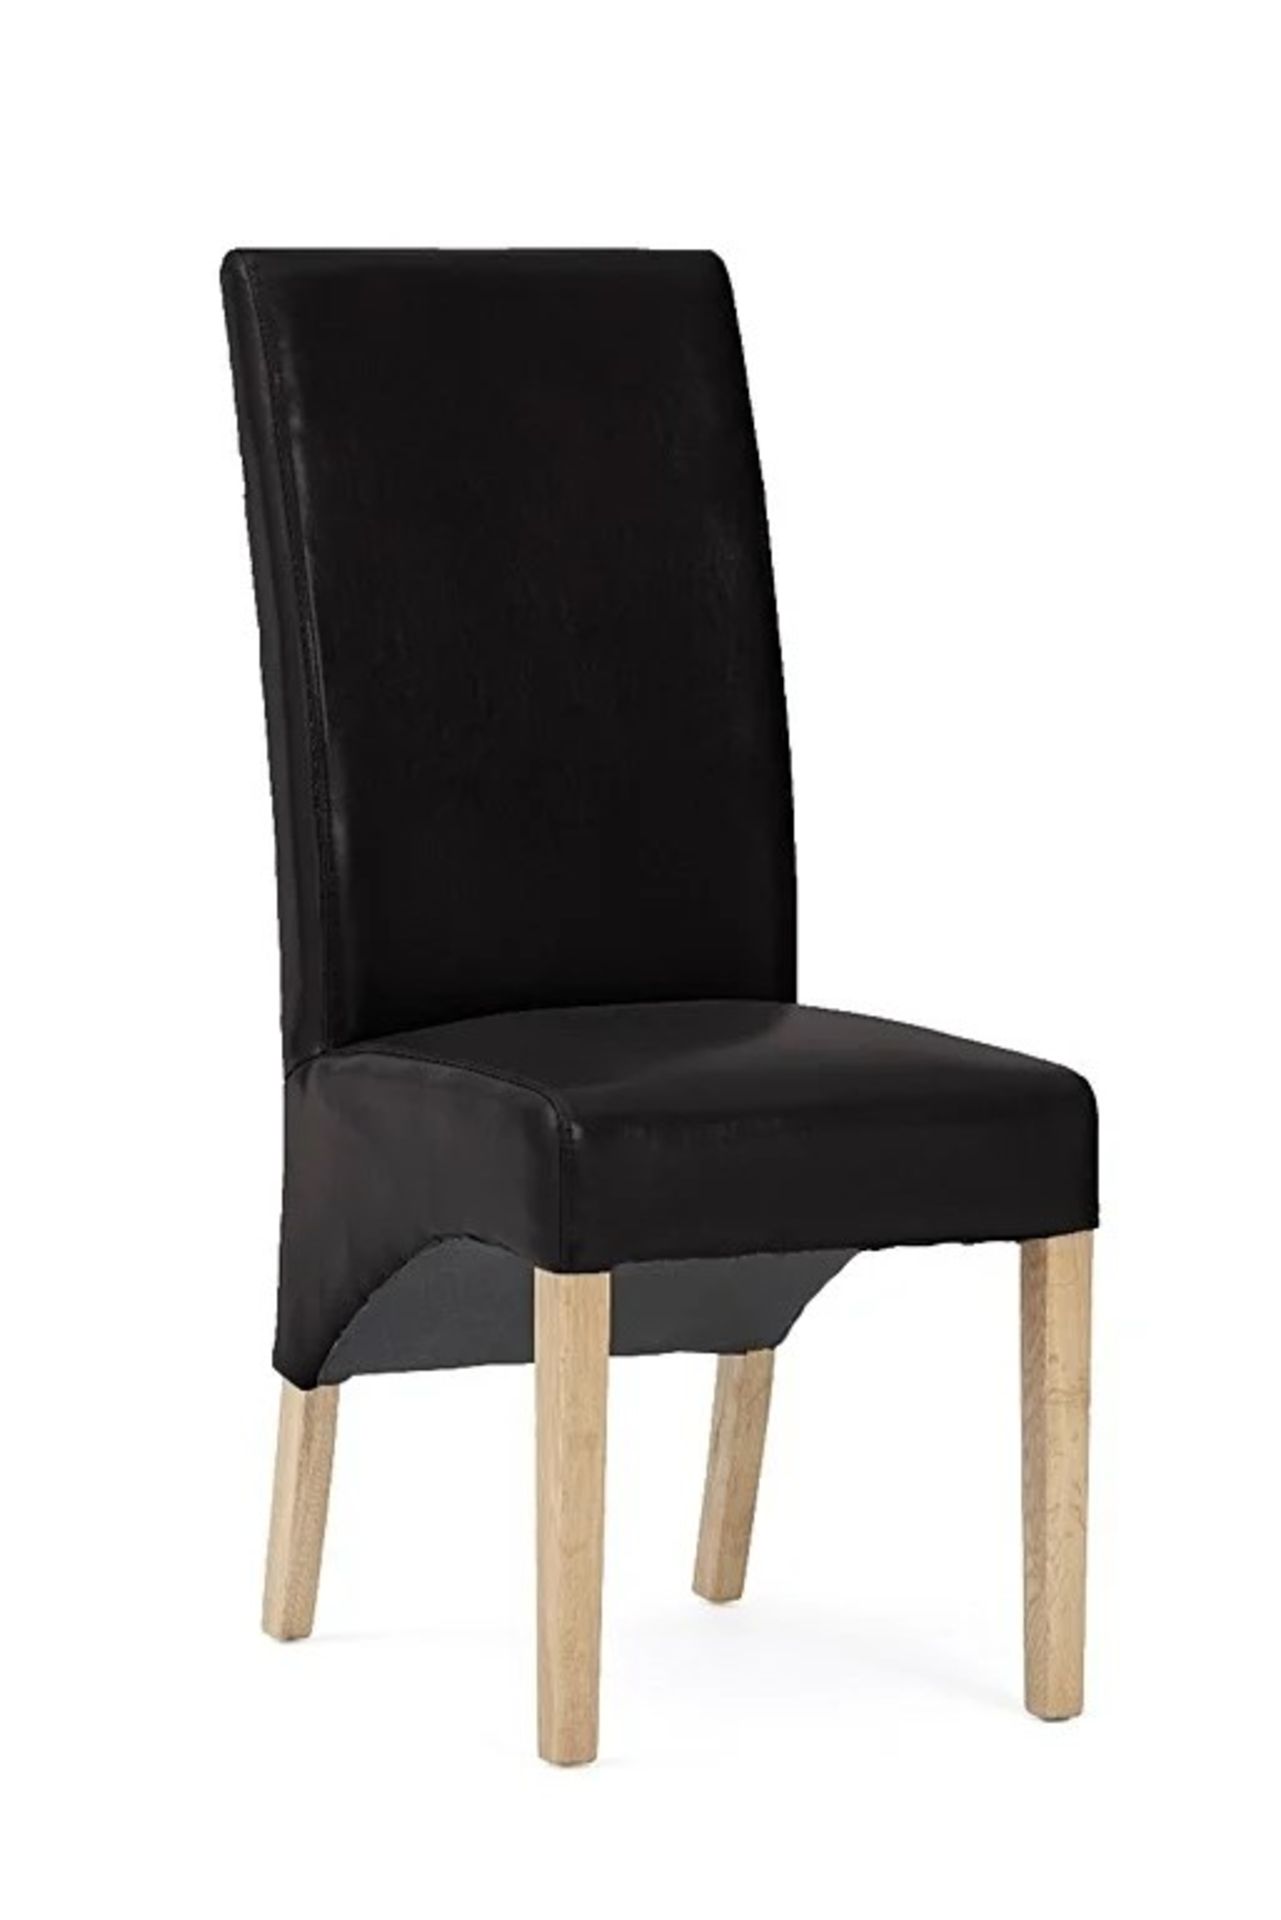 Cannes Black Bonded Leather Dining Chair Comfortable and practical faux leather seating for